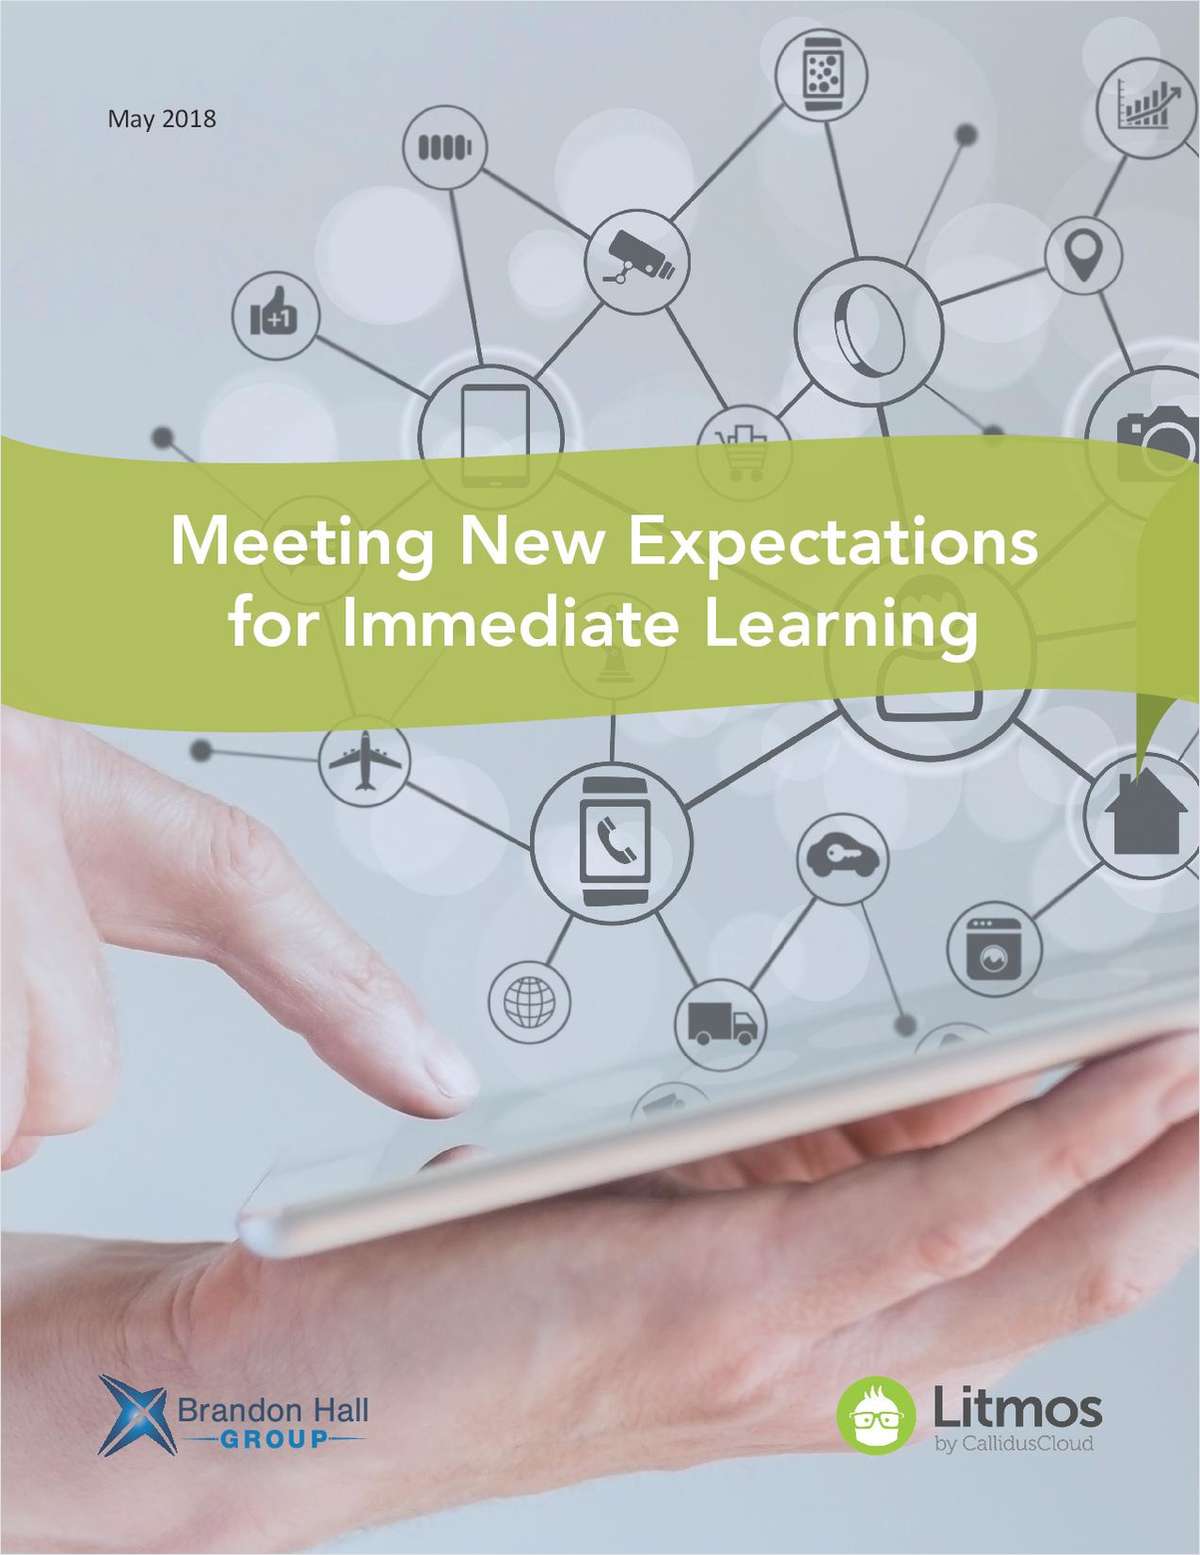 Meeting New Expectations for Immediate Learning